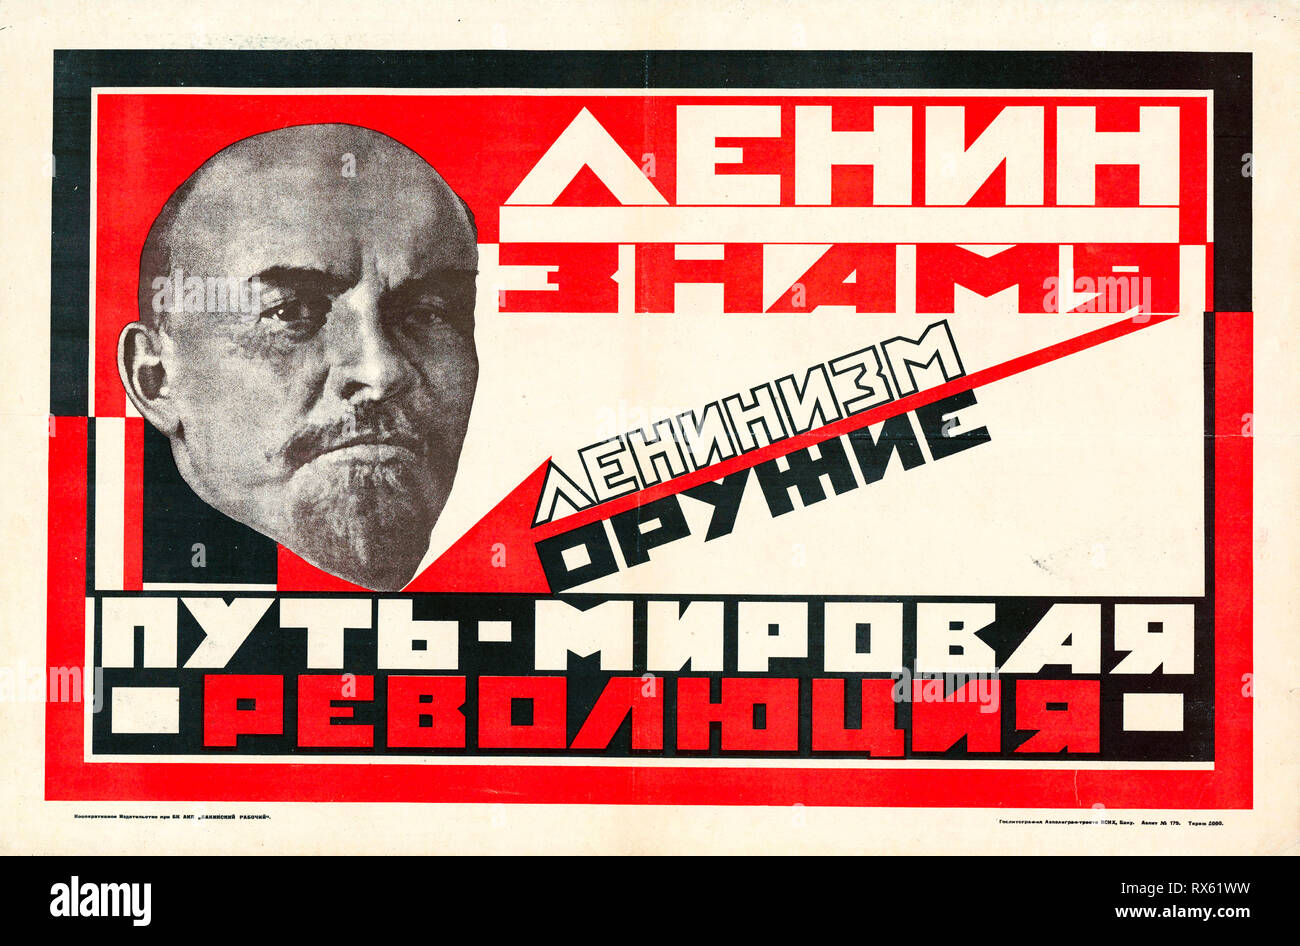 Lenin poster, Lenin is a banner, Leninism is a weapon. The path is a world revolution, 1925 Stock Photo